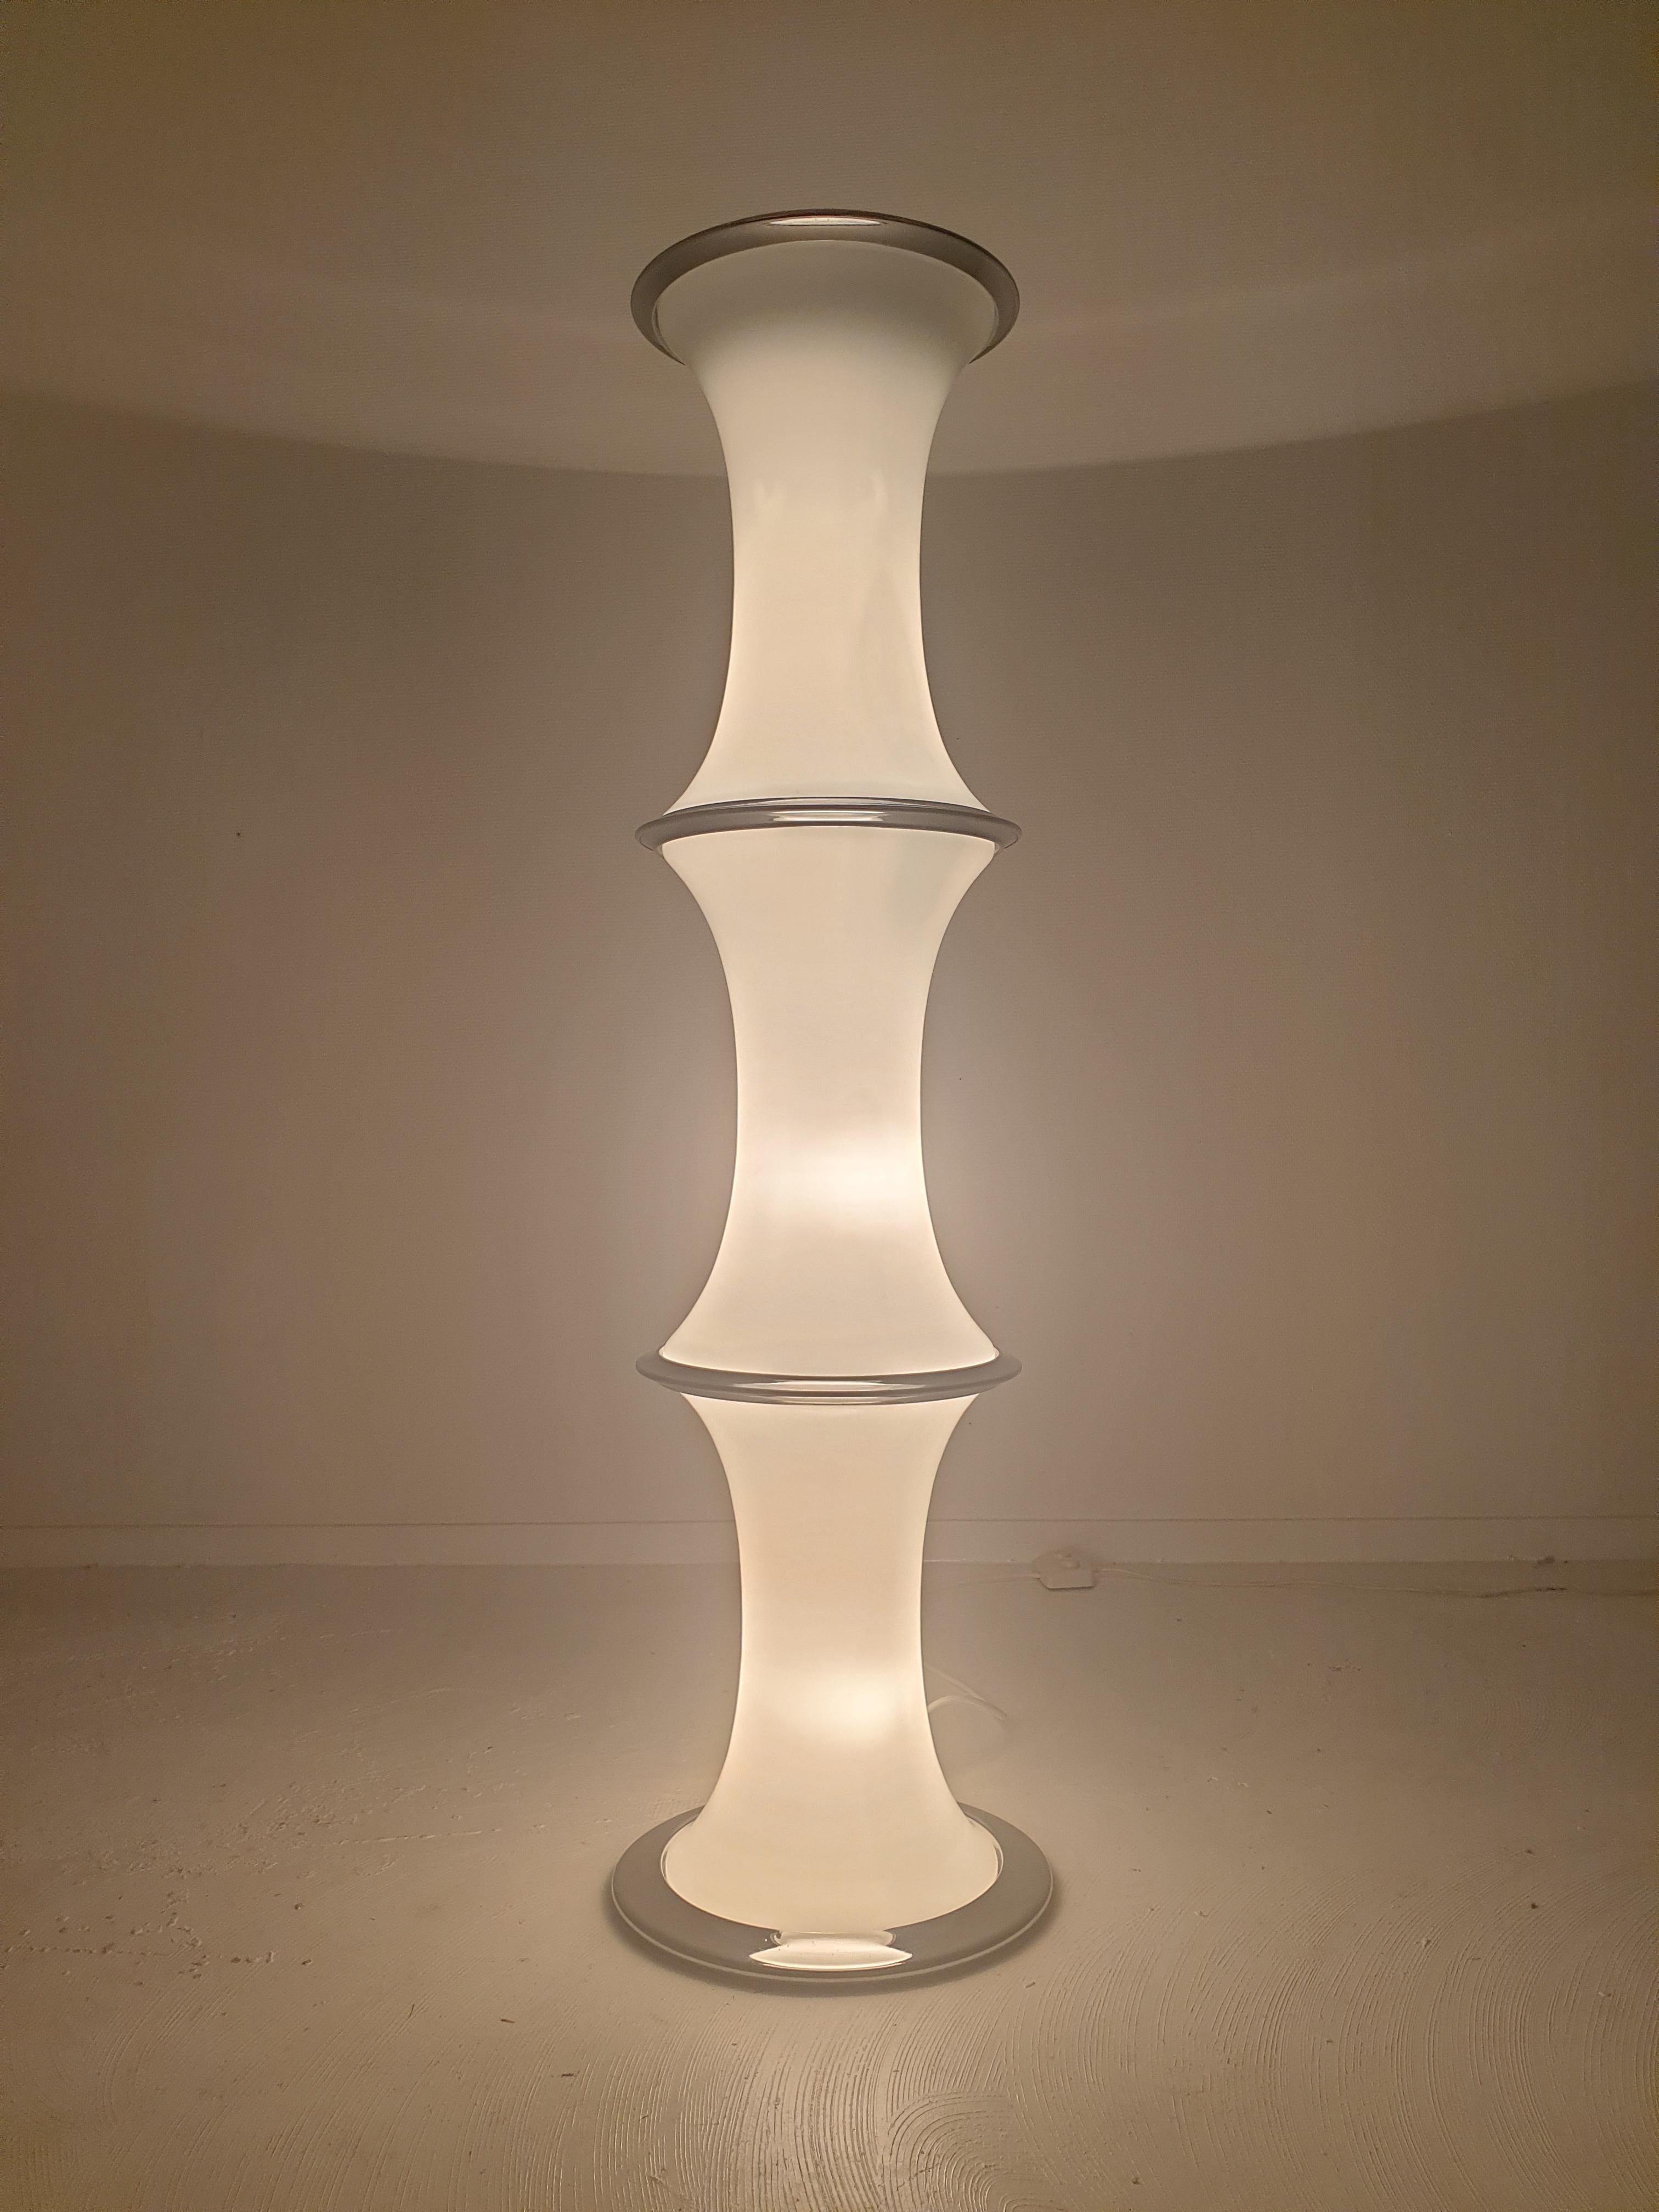 Opaline Glass Bamboo Floor Lamp by Enrico Tronconi for Vistosi, 1970's For Sale